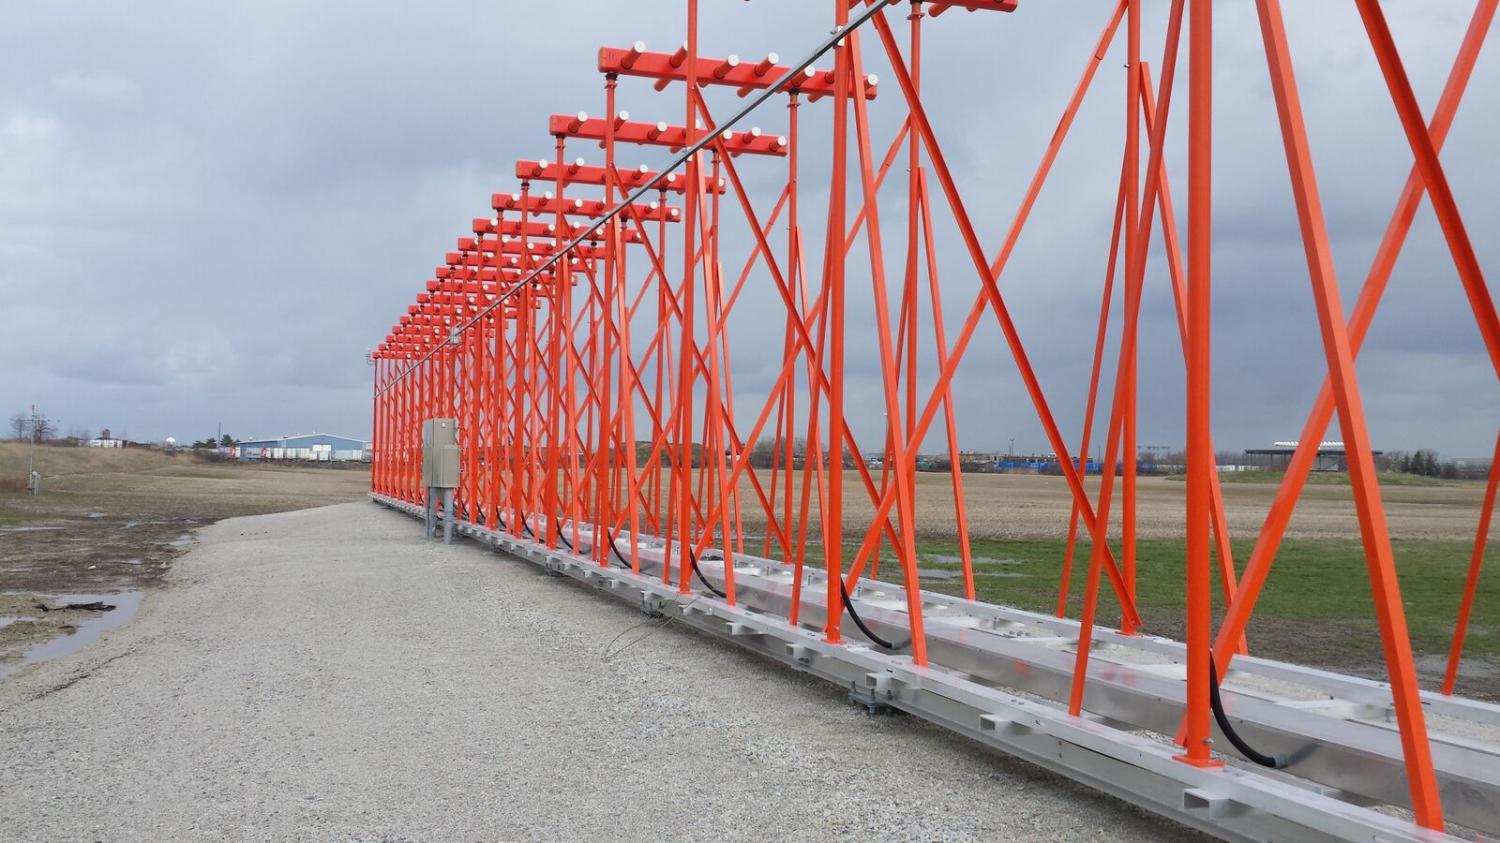 GoliathTech screw piles used for supporting a set of runway lights for Toronto Pearson Airport